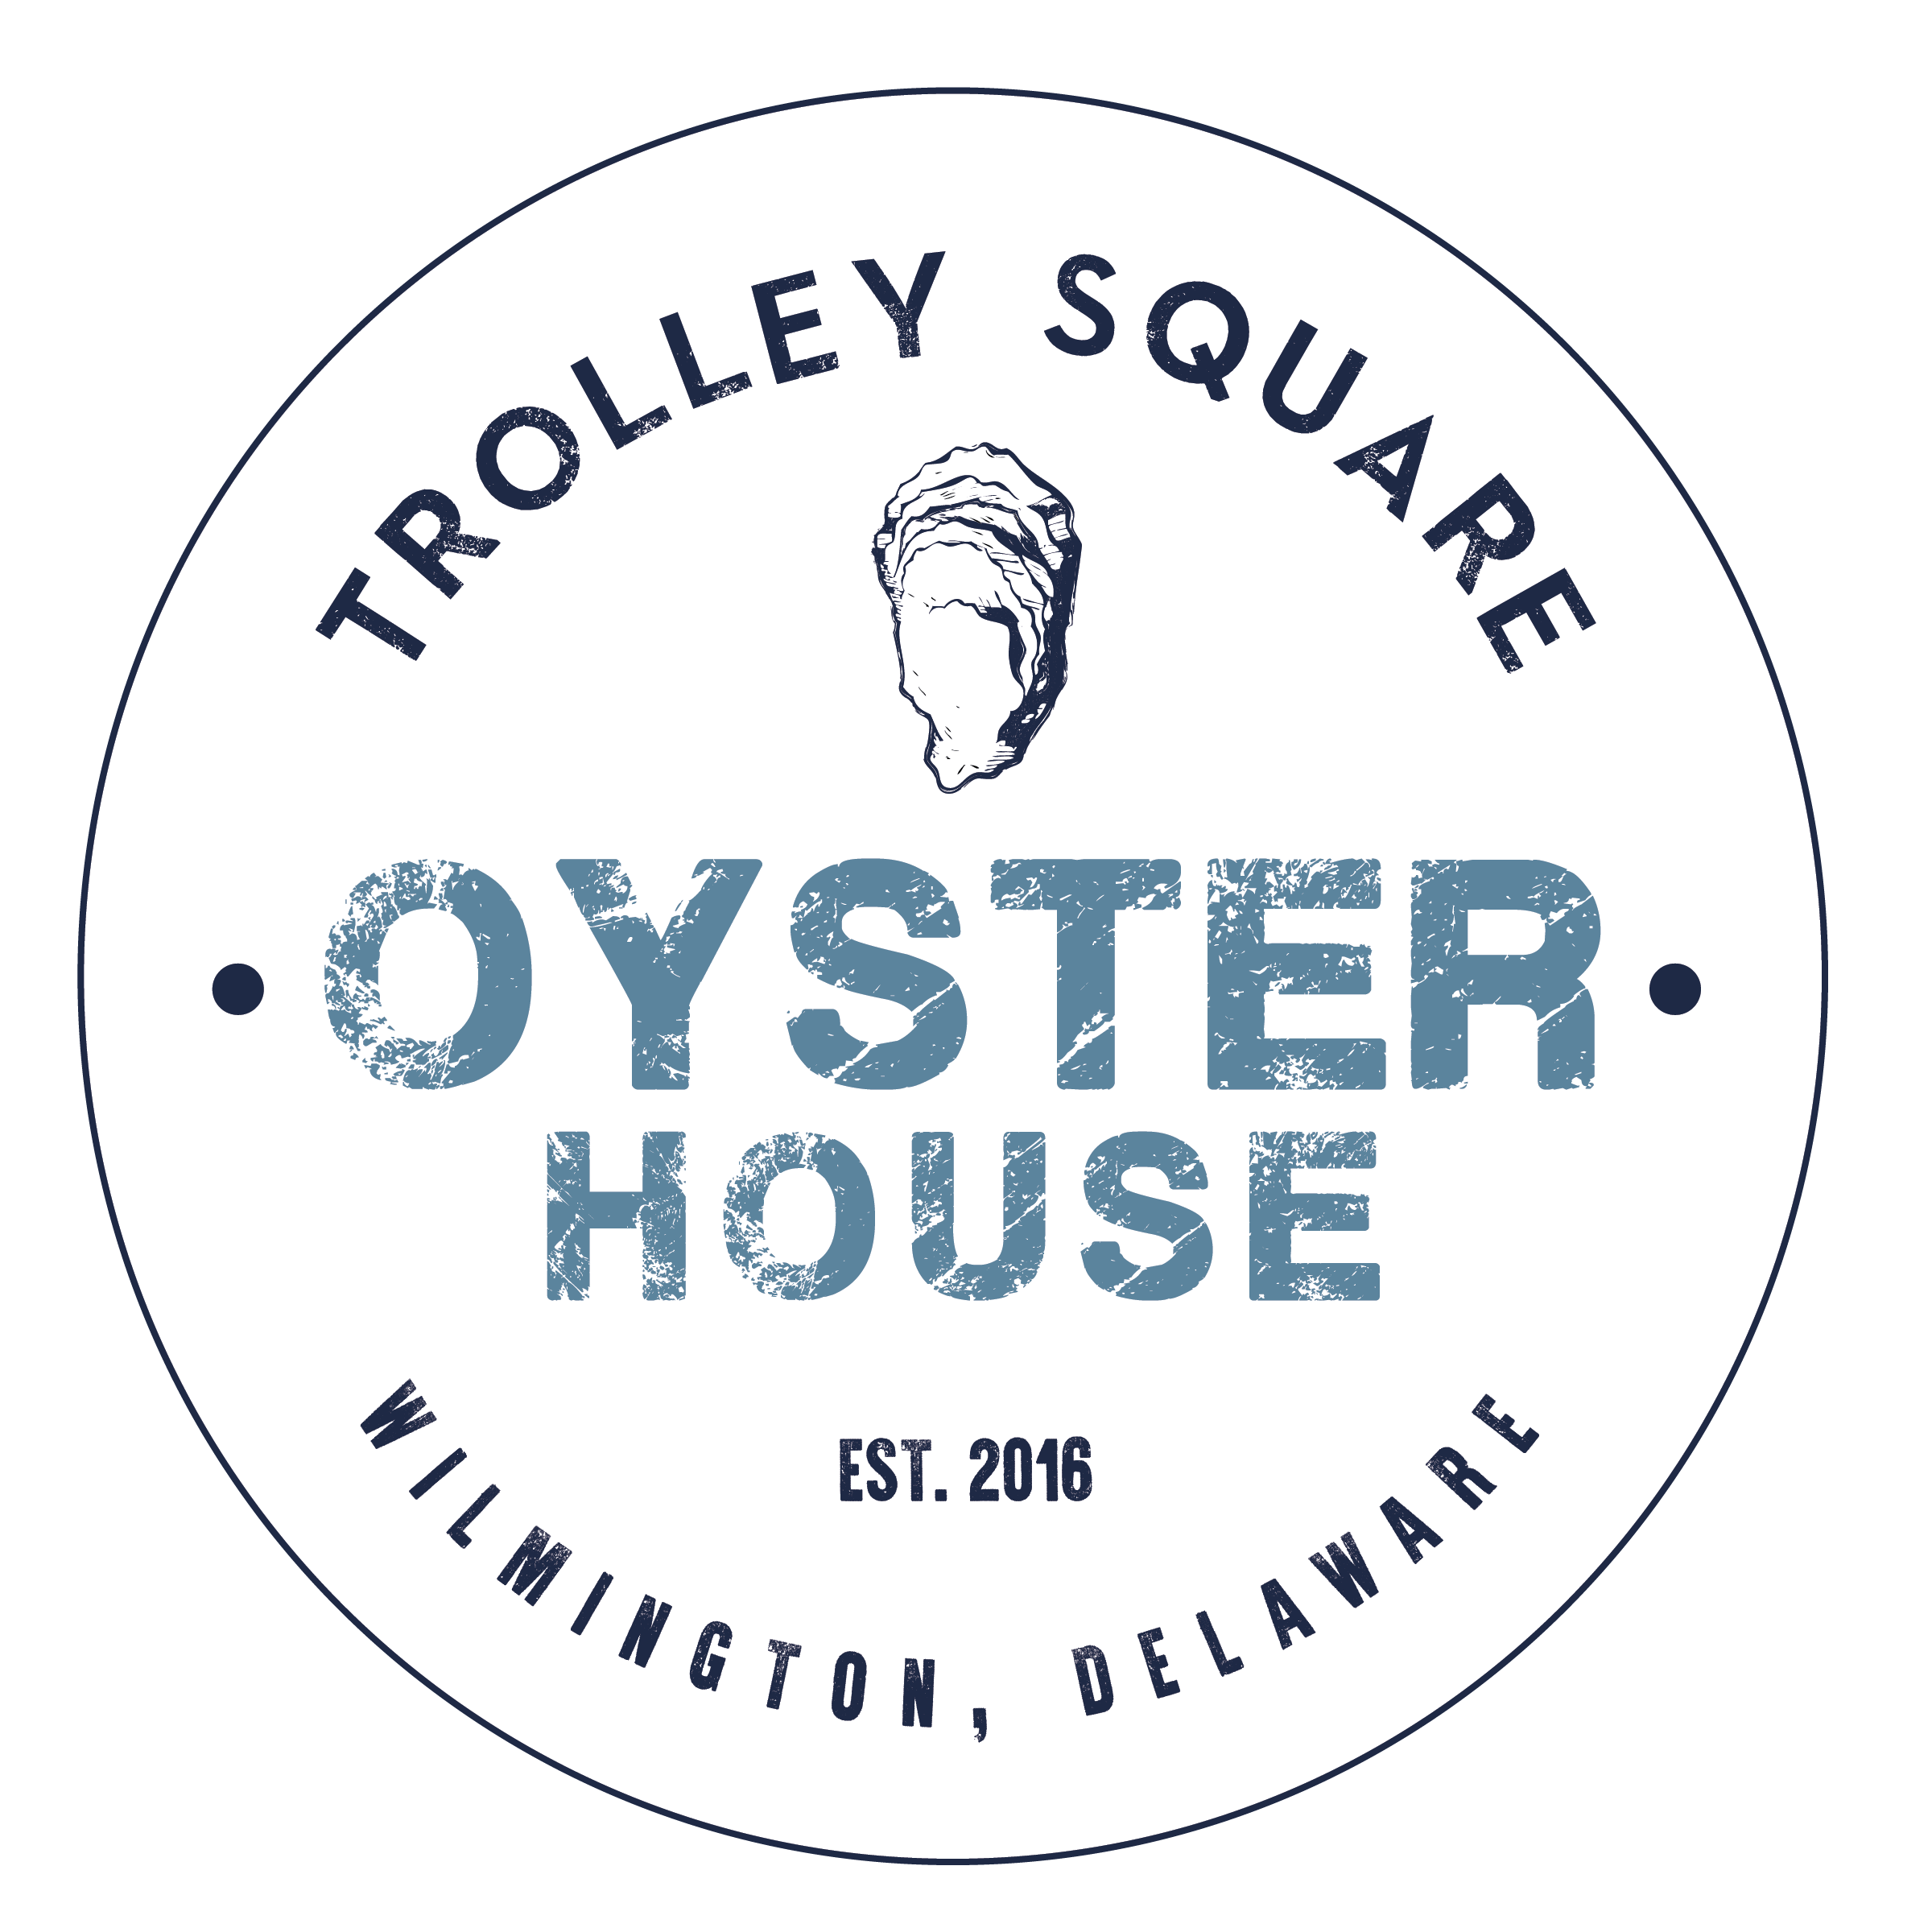 House Circle Logo - Home Square Oyster House